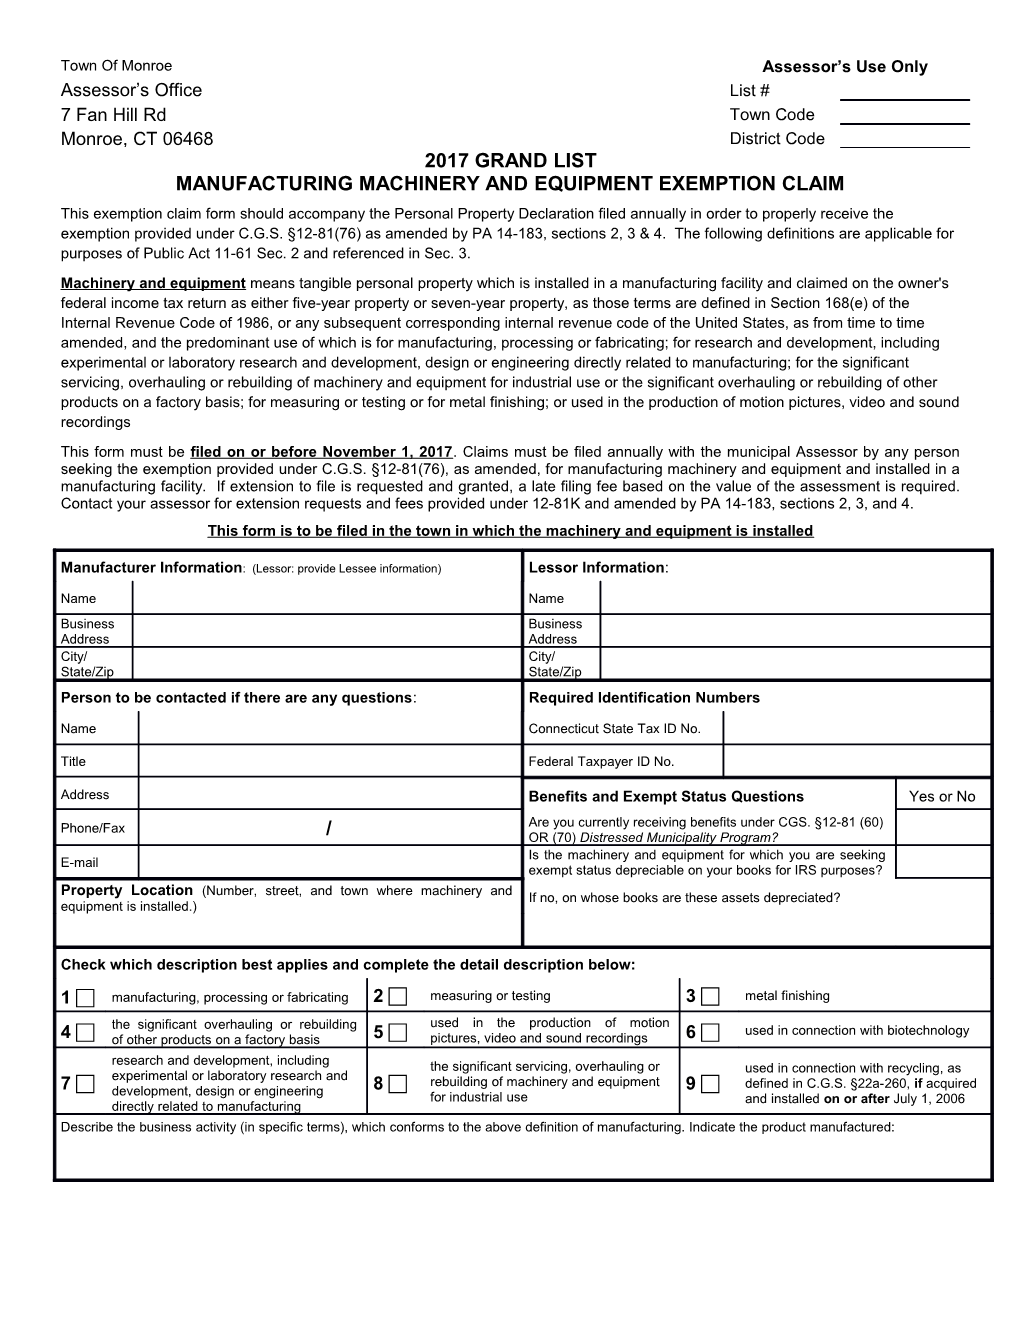 Manufacturing Machinery and Equipment Exemption Claim s1